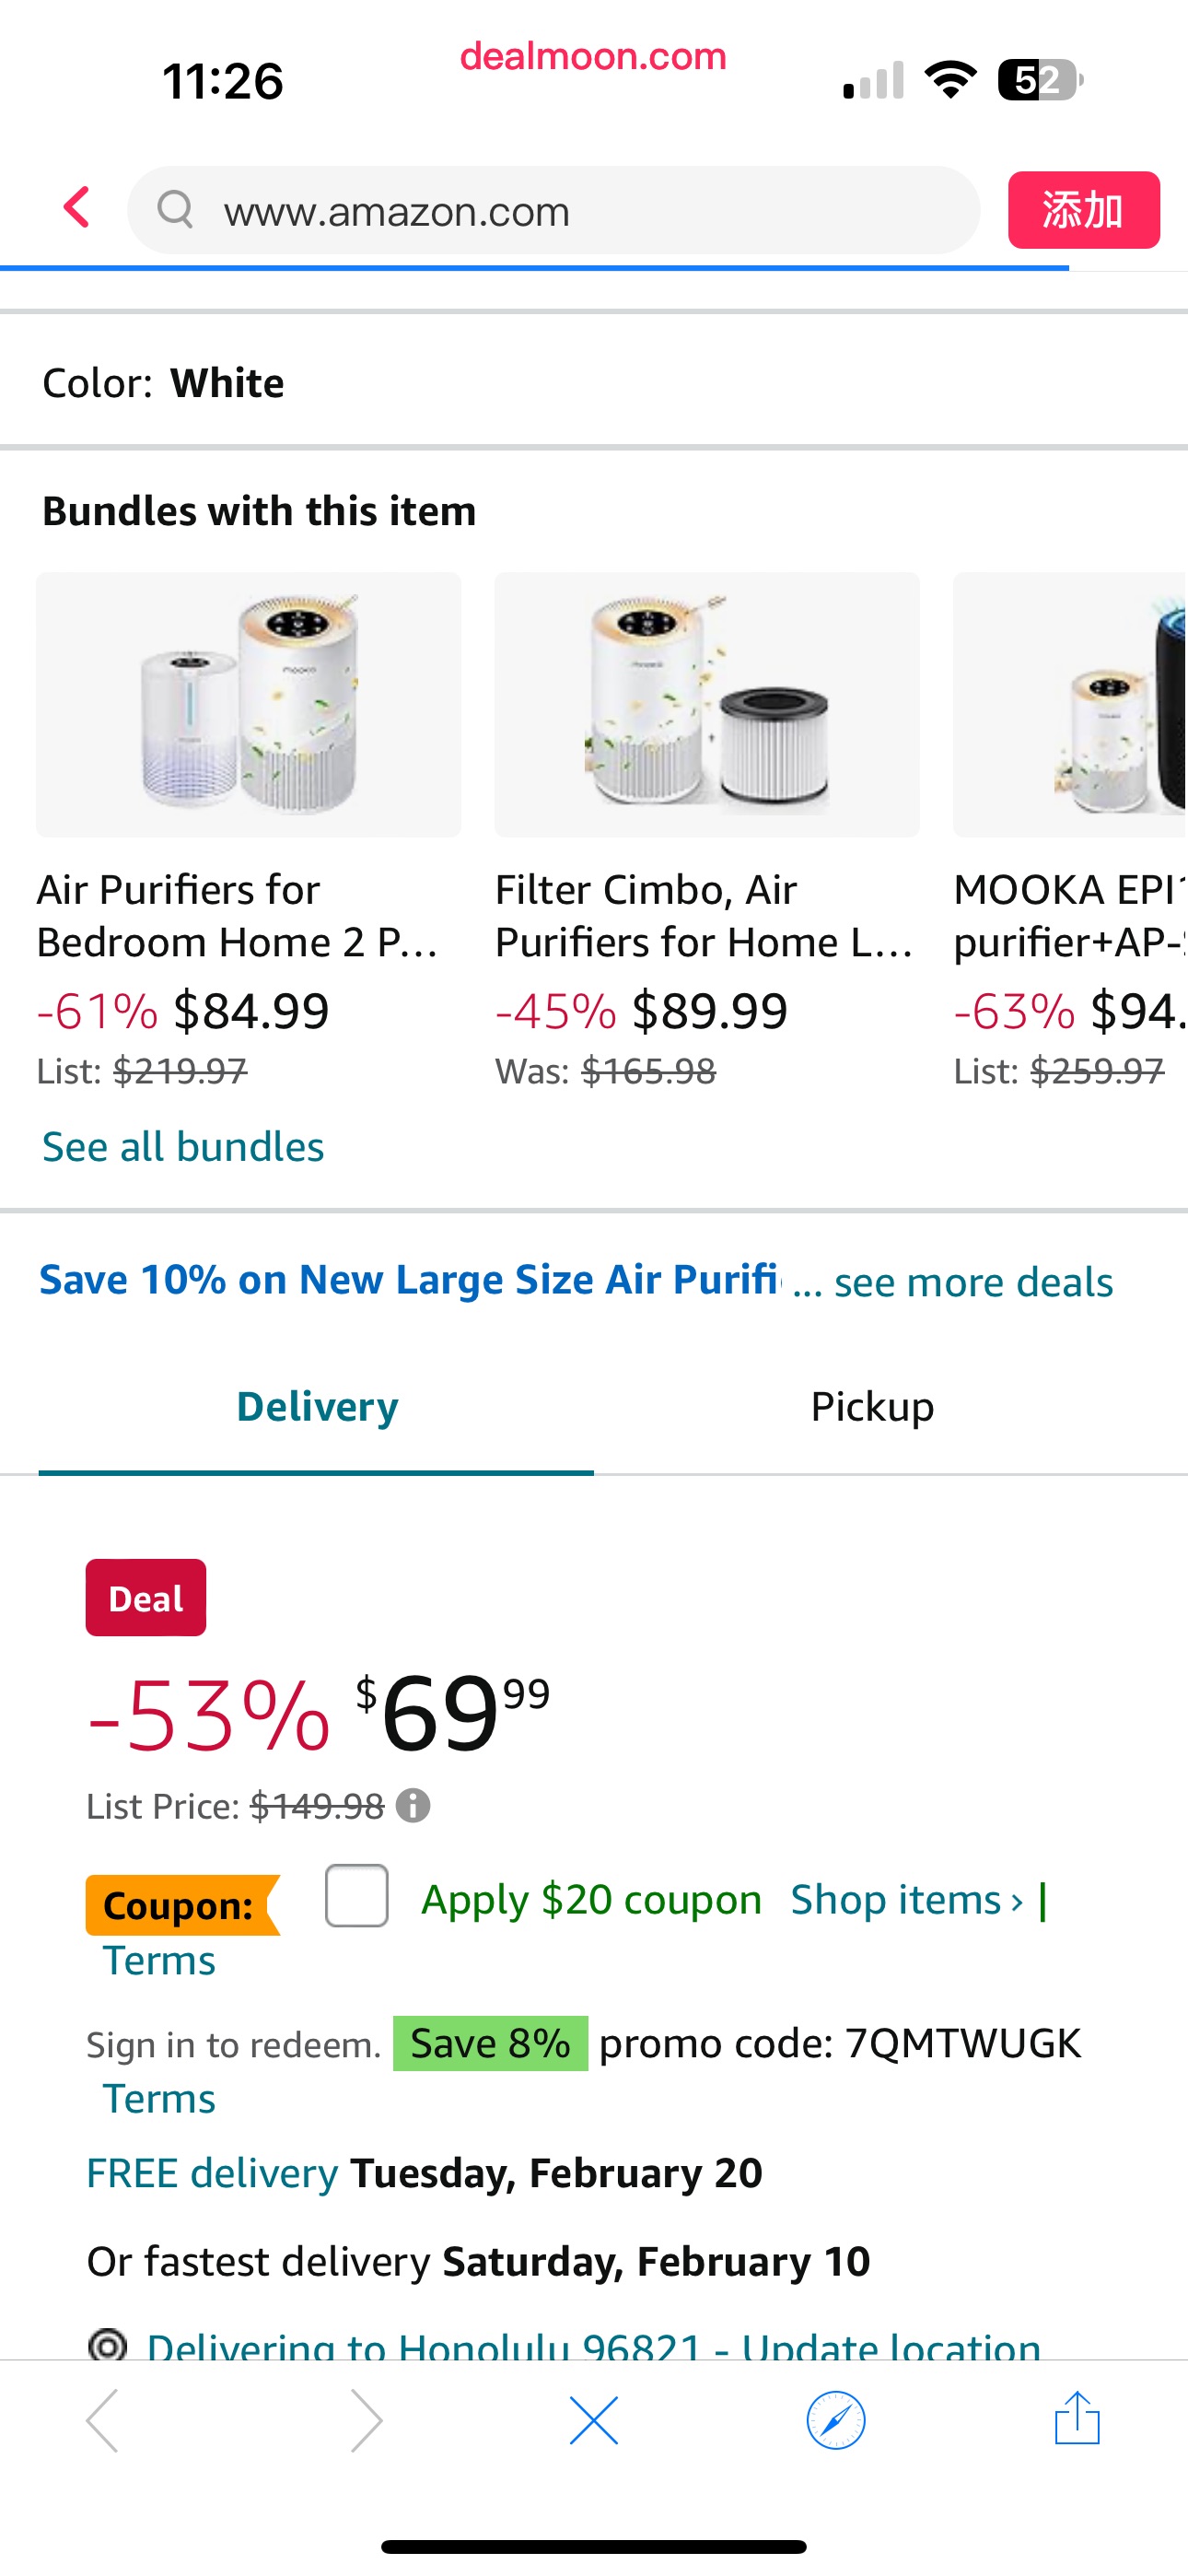 Amazon.com: Air Purifiers for Home Large Rooms up to 1200ft², MOOKA H13 True HEPA Air Purifier for Bedroom Pets with Fragrance Sponge, Timer, Air Filter Cleaner for Dust, Smoke, Odor, Dander, Pollen (